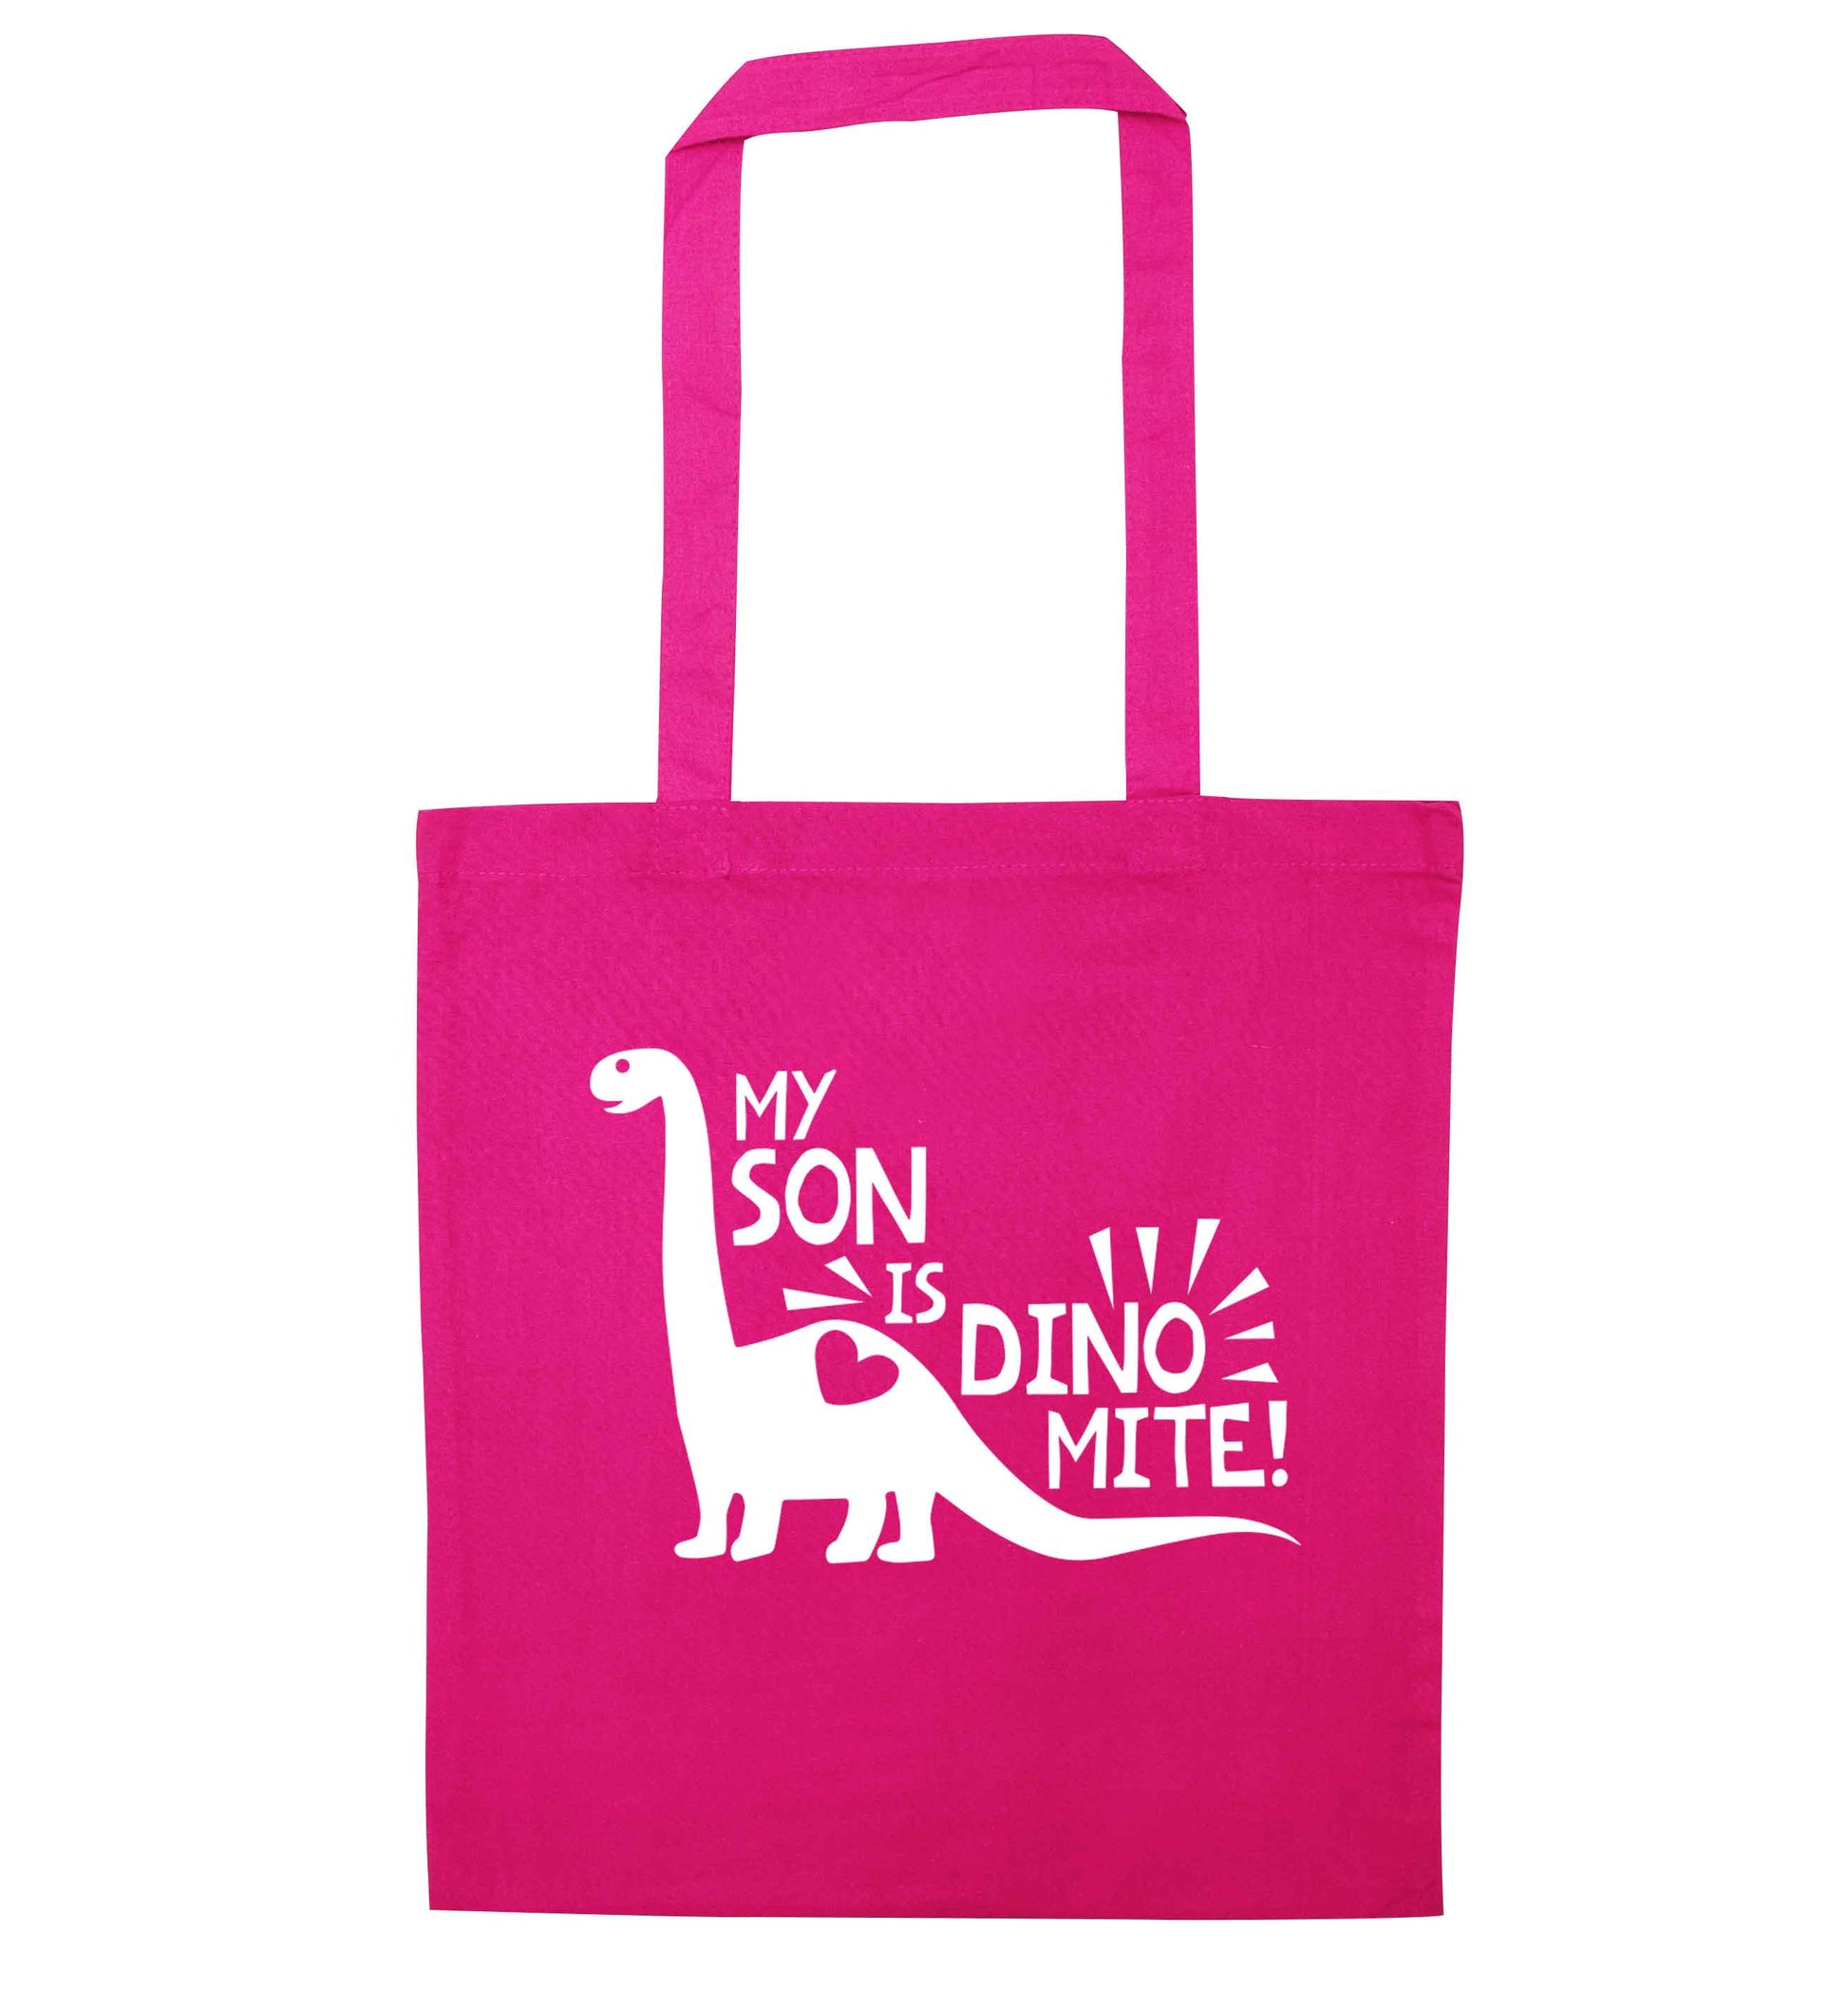 My son is dinomite! pink tote bag